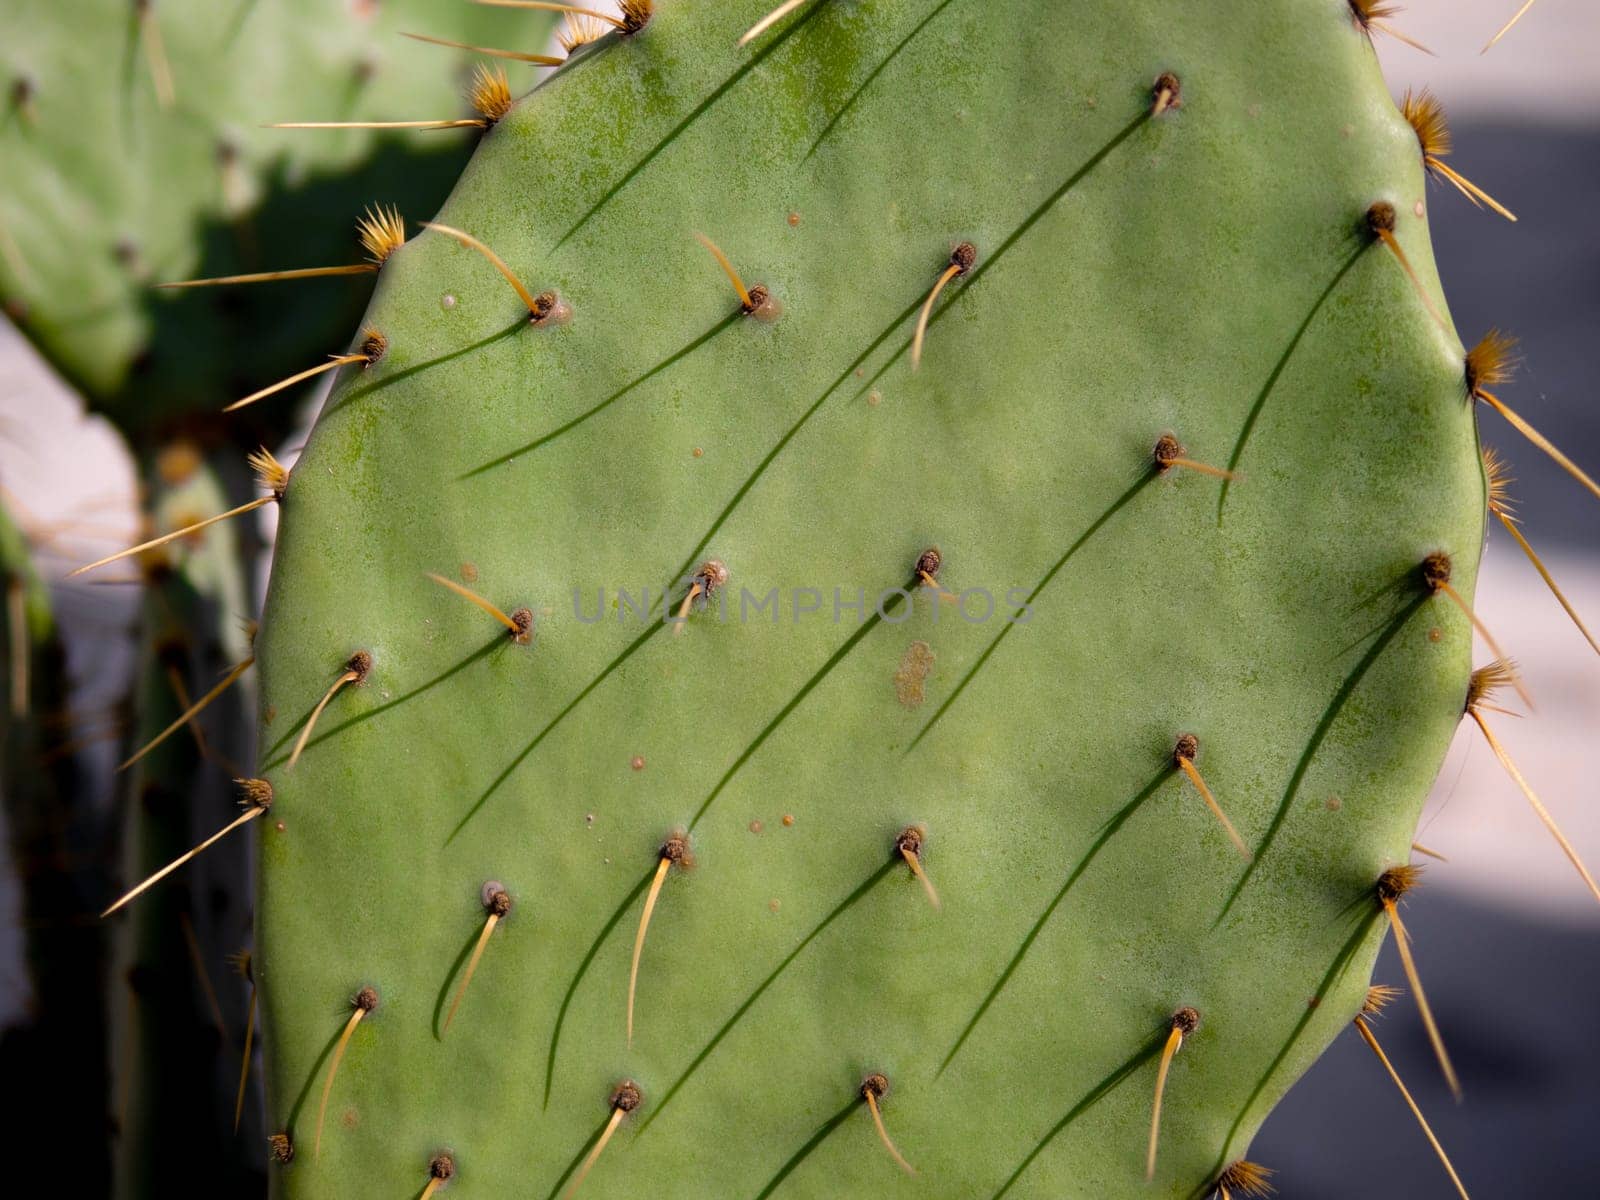 Closeup of a green Eastern prickly pear cactus with yellow thorns by jackreznor